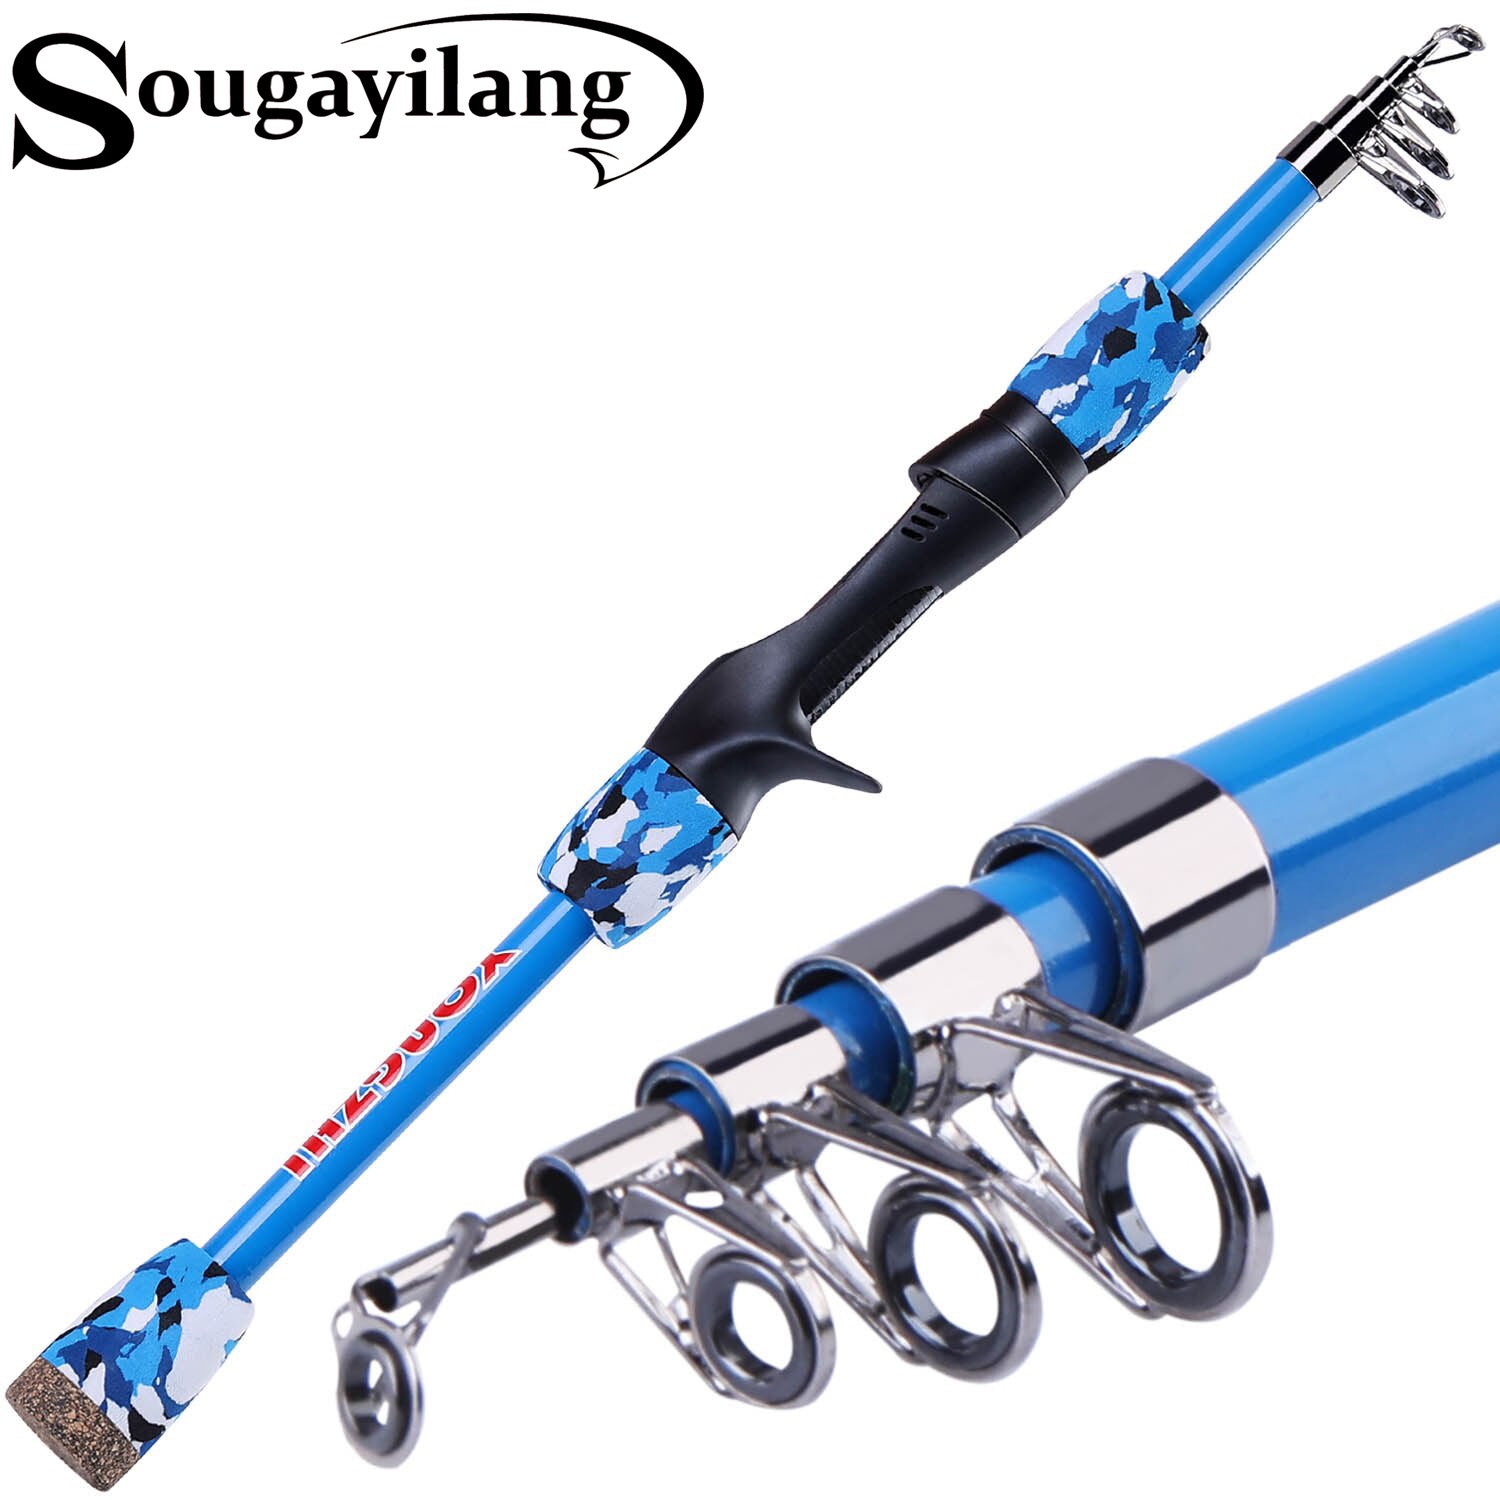 Sougayilang 1.5m Telescopic Fishing Rod Proable Travel Rods for  Spinning/Casting Rod Fishing Tackle Gifts for Children Kids